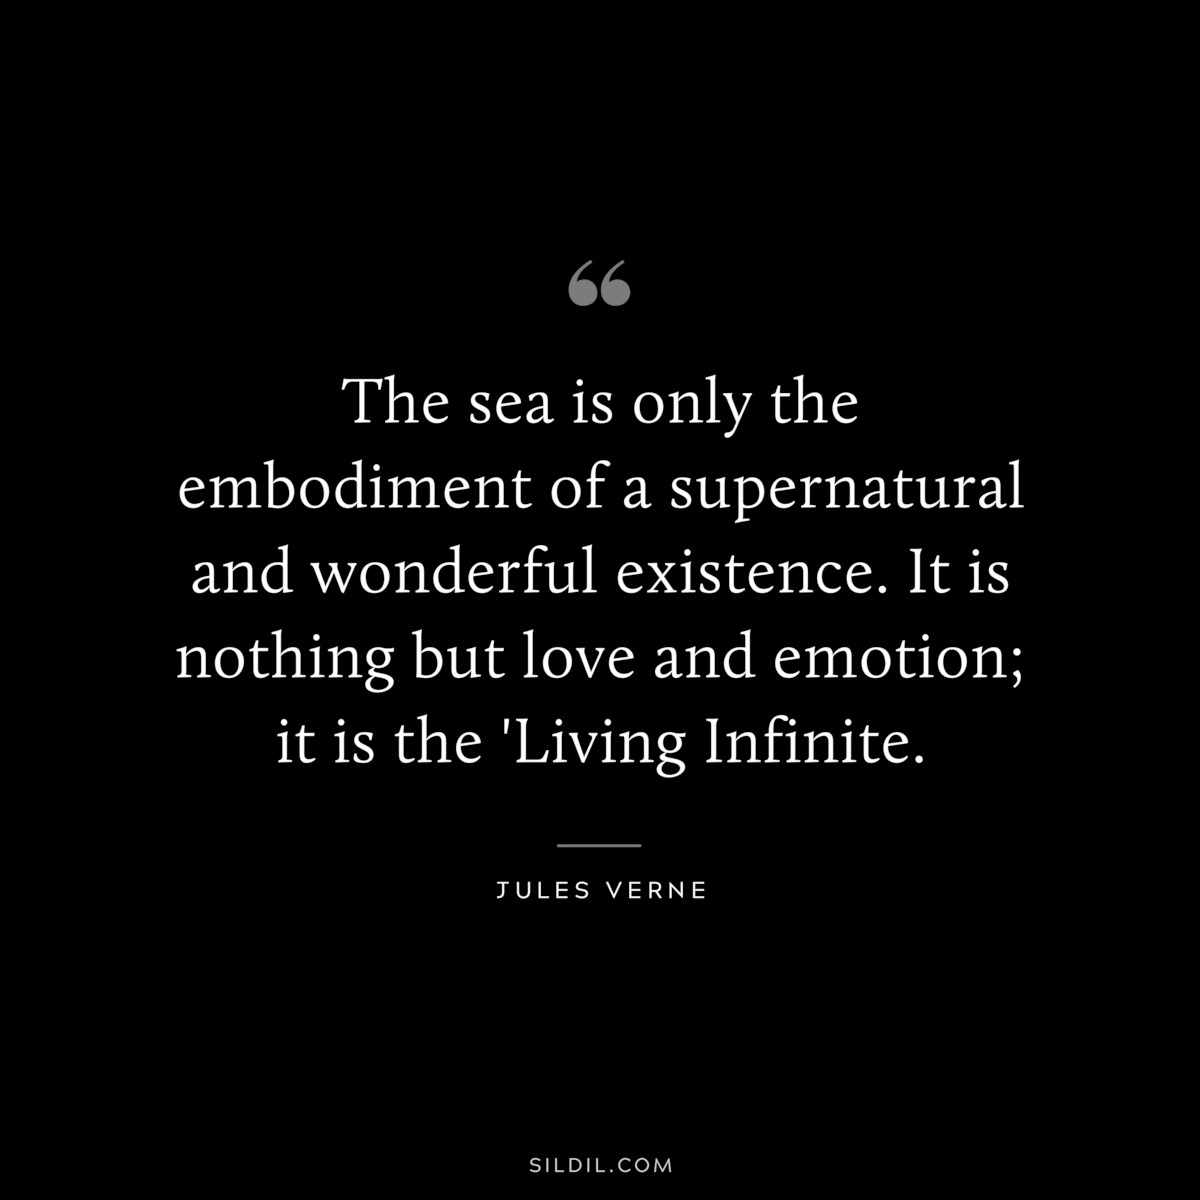 The sea is only the embodiment of a supernatural and wonderful existence. It is nothing but love and emotion; it is the 'Living Infinite.